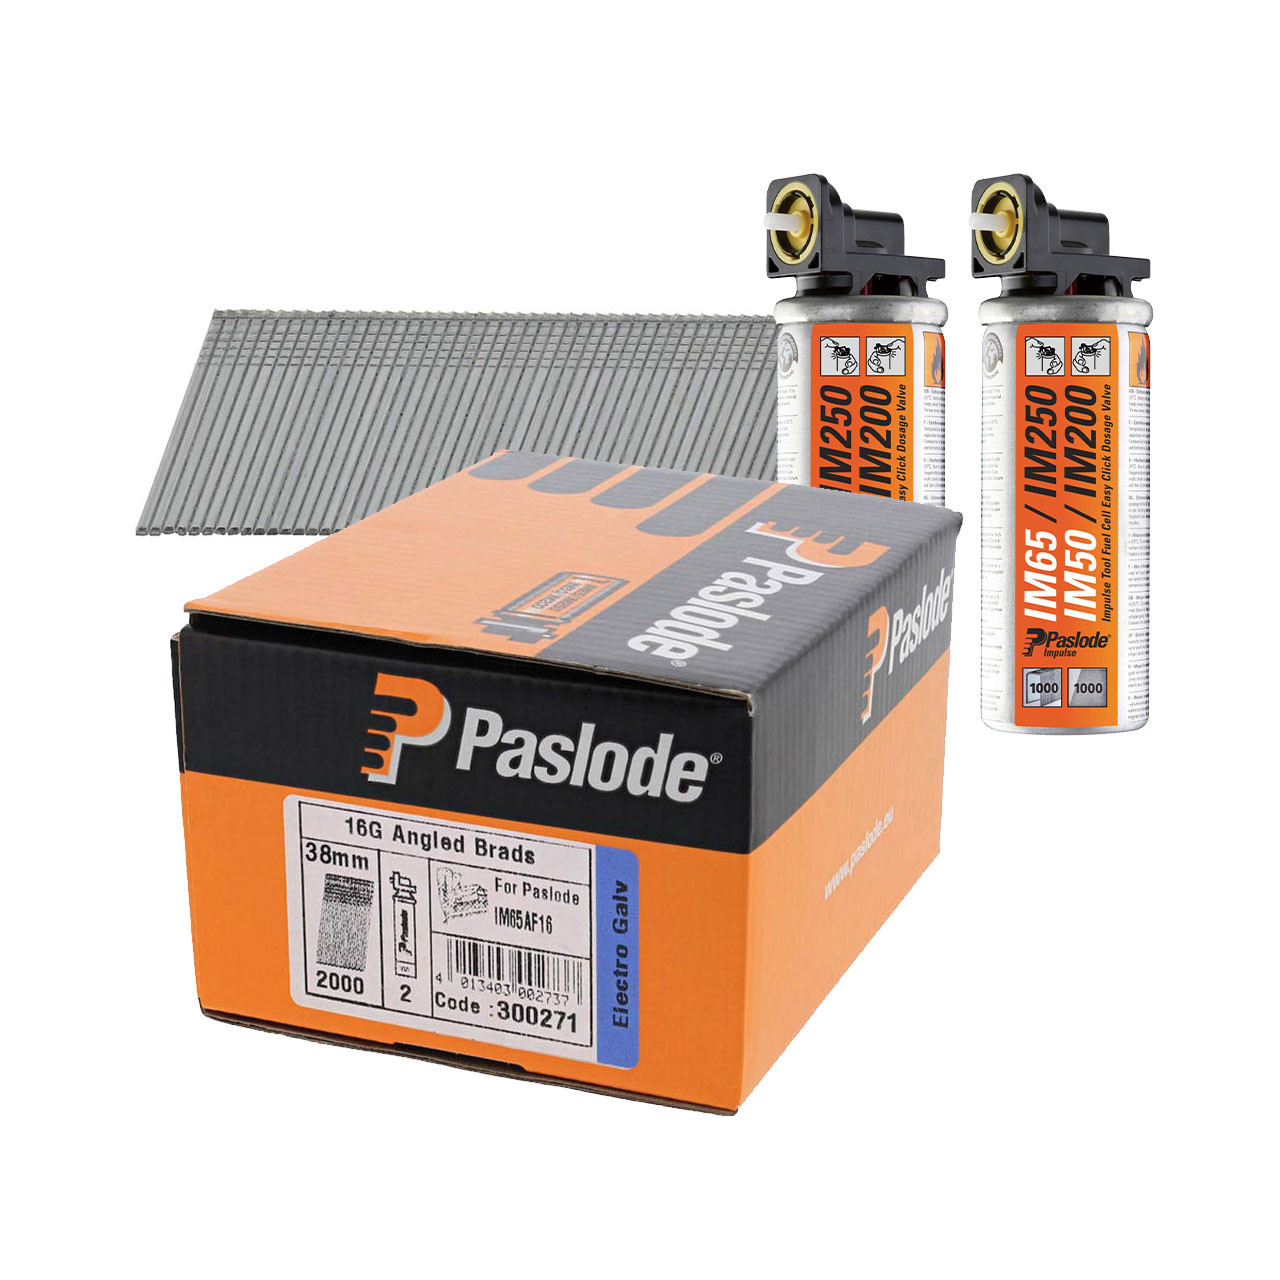 Paslode IM350+ Nails & Fuel Cells Trade Pack - Plain Shank - Bright